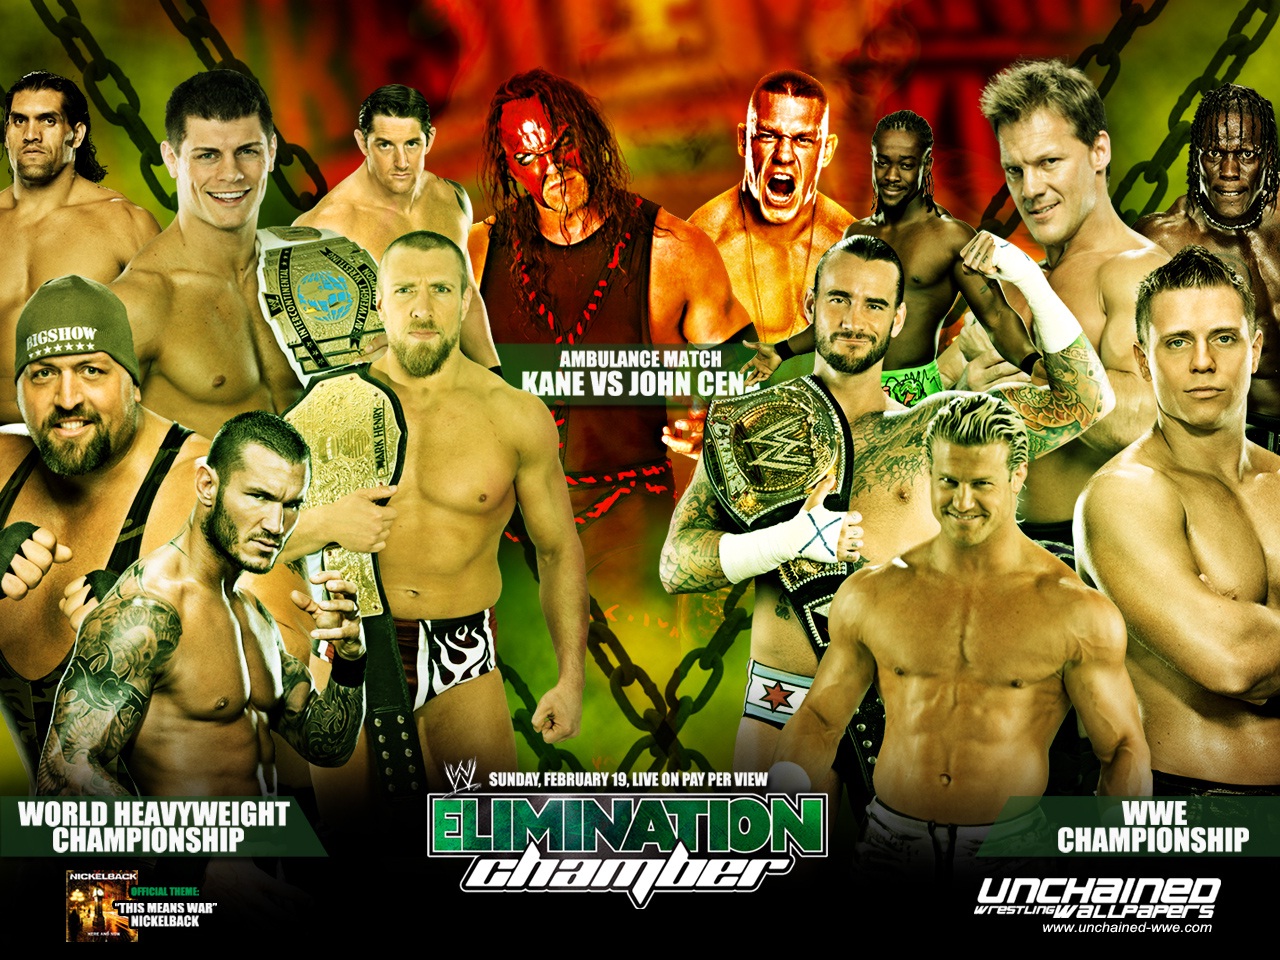 WWE Elimination Chamber 2012 Wallpaper by VBTIGERBOMB - Image Abyss